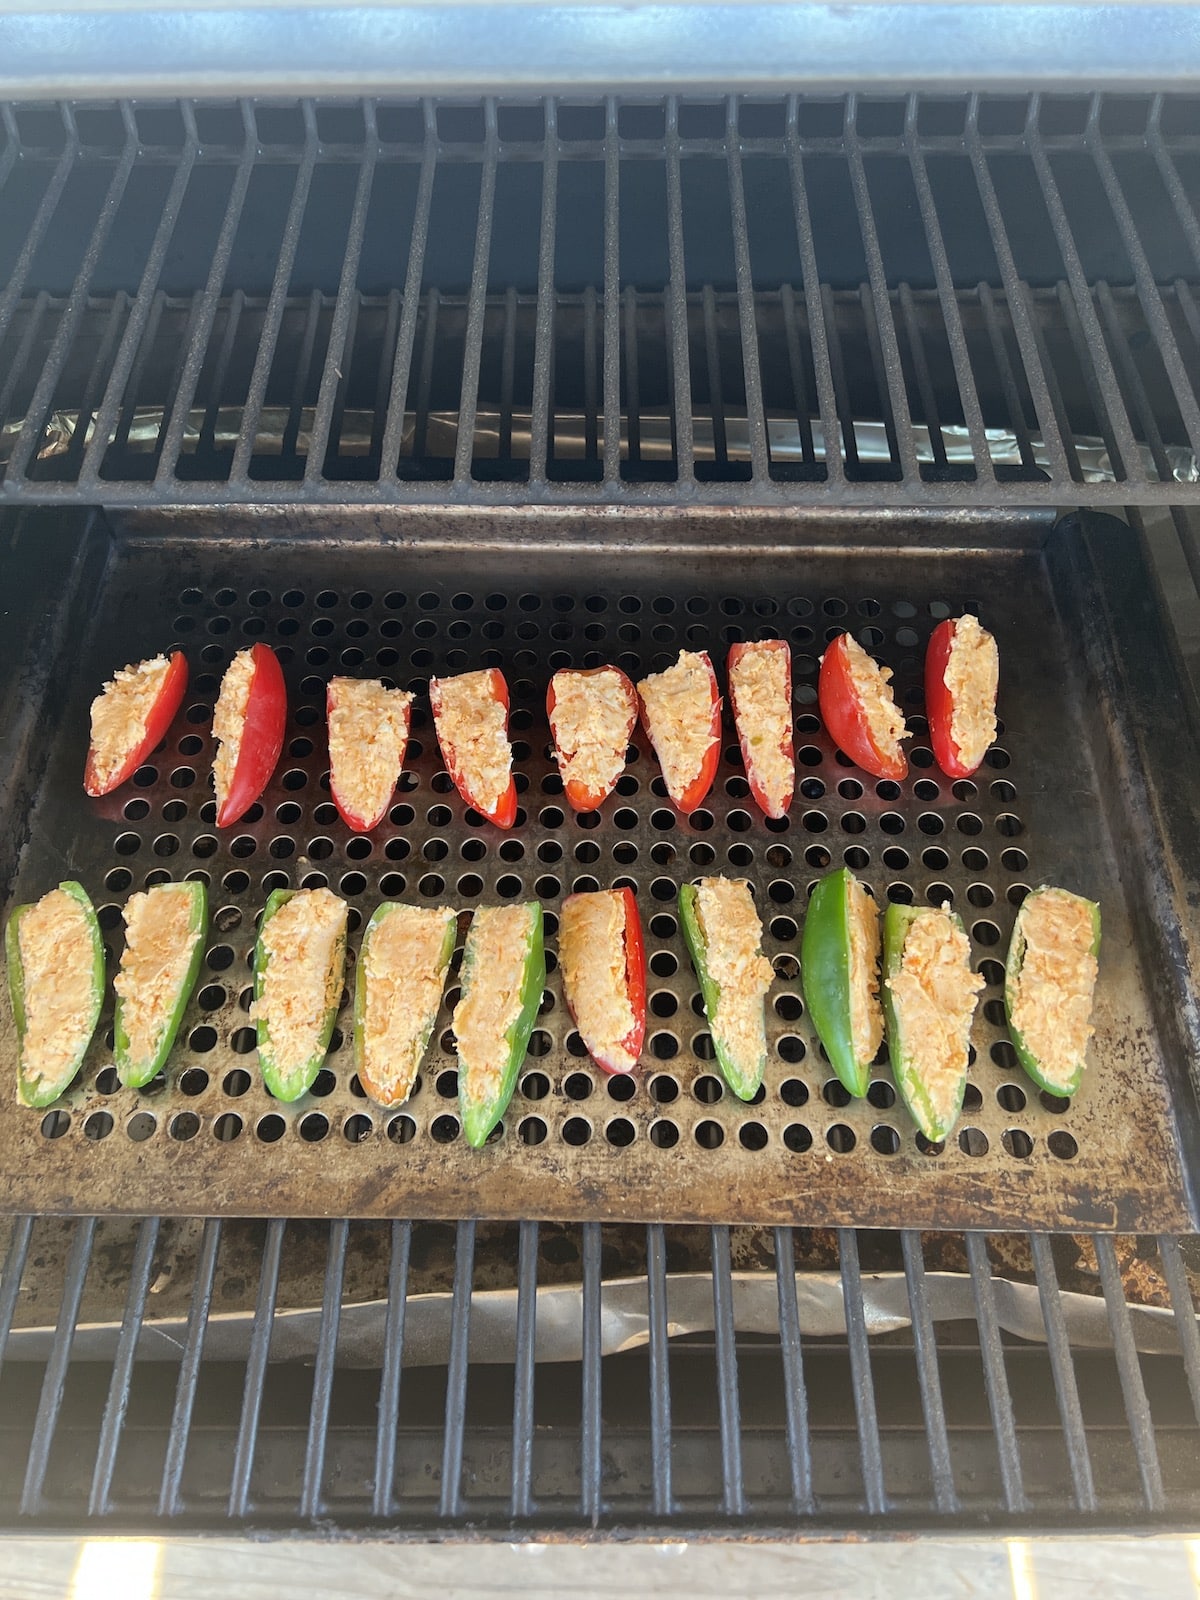 Grilling jalapeno poppers.